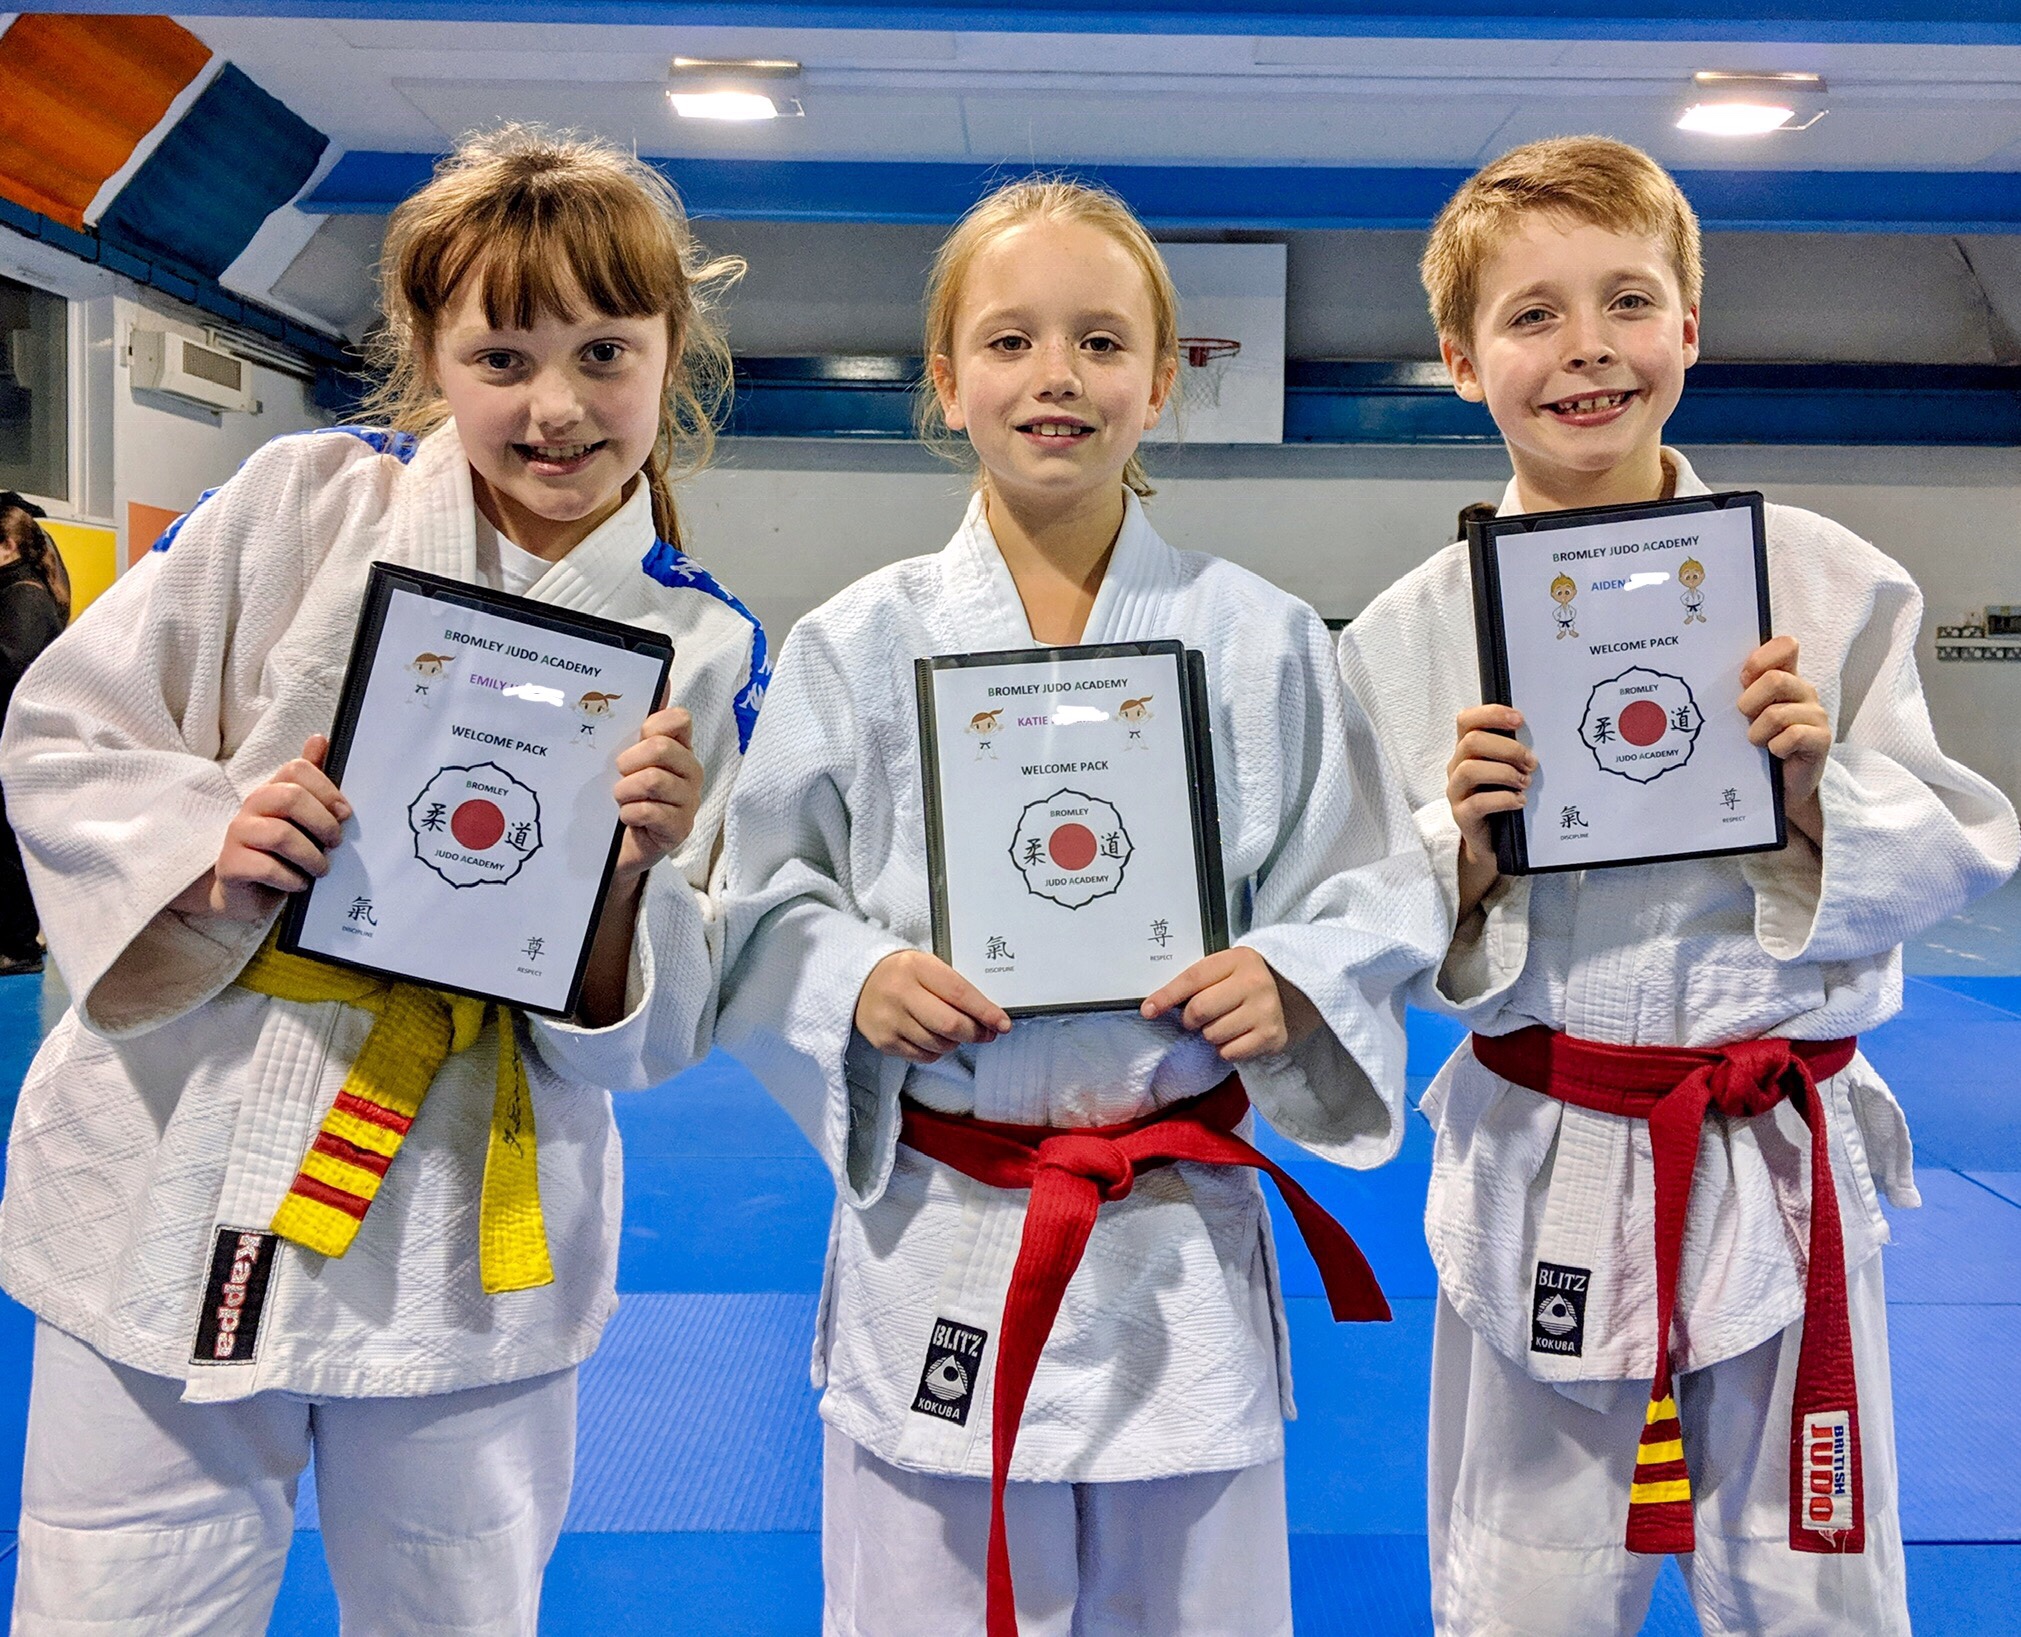 Bromley Judo Academy's judoka who have earned their welcome packs